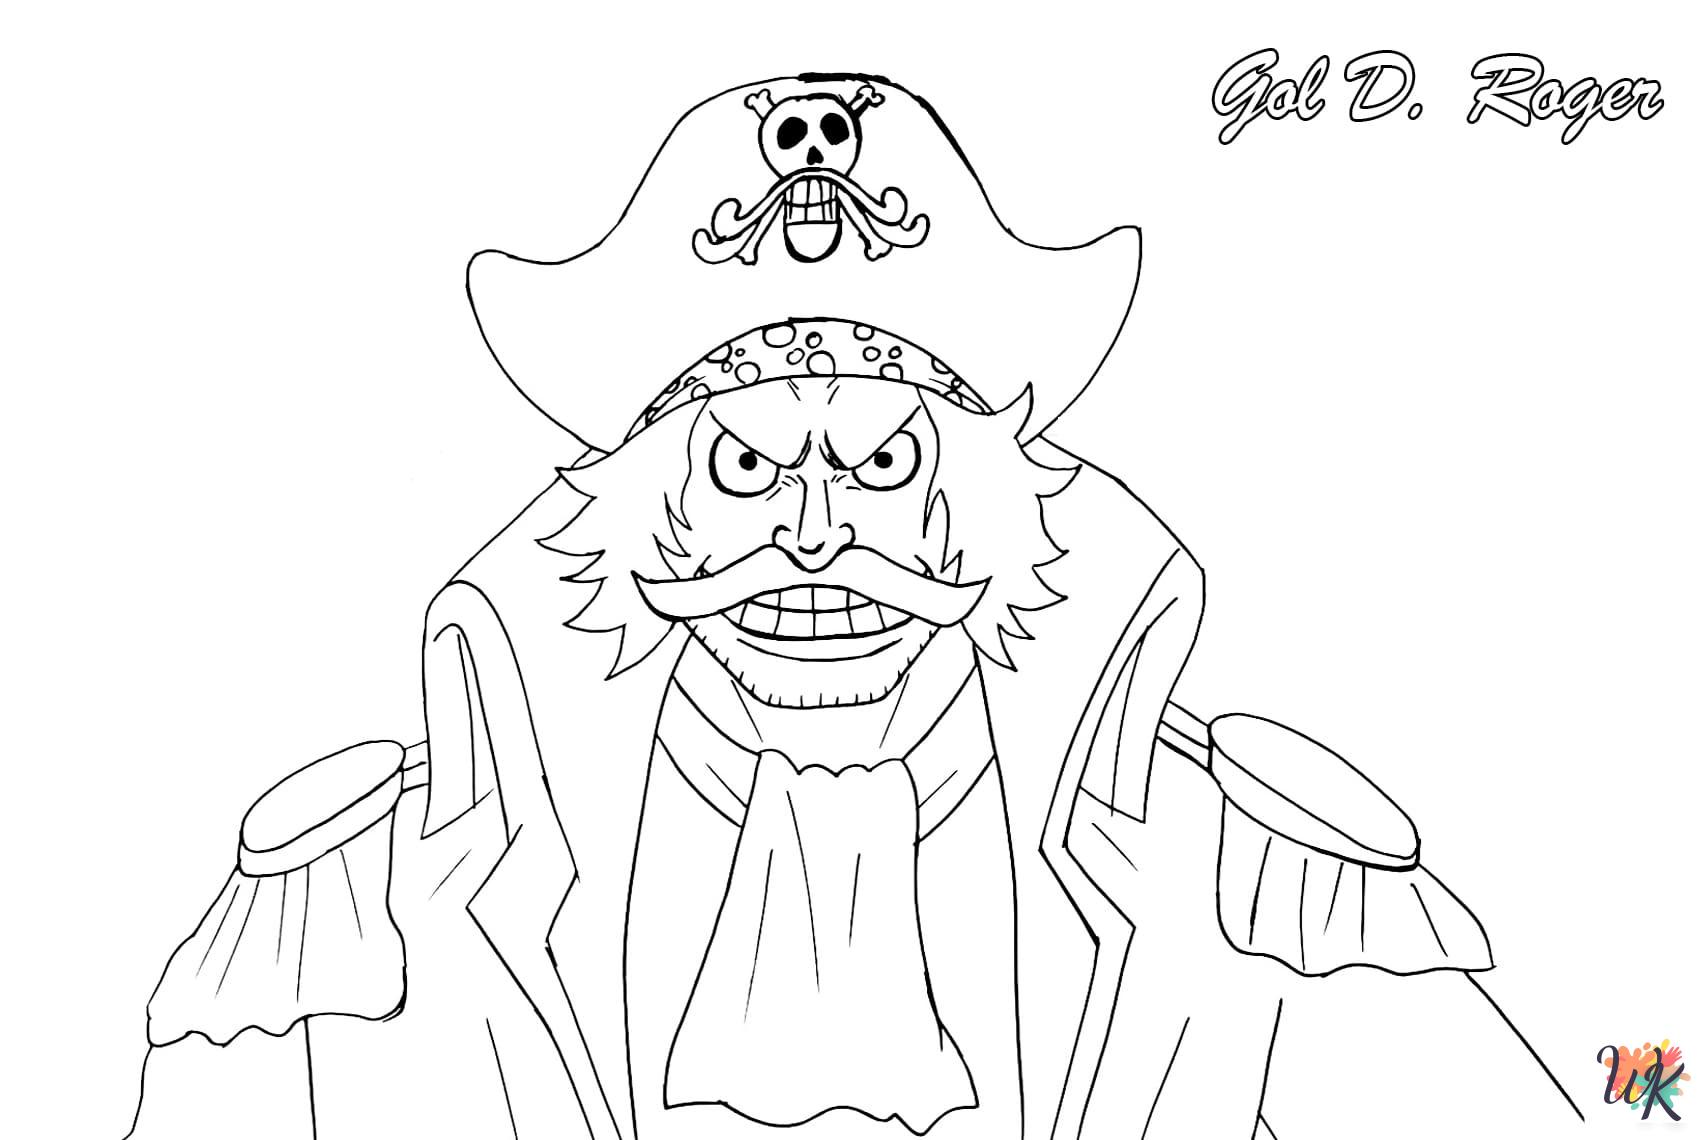 One Piece cards coloring pages